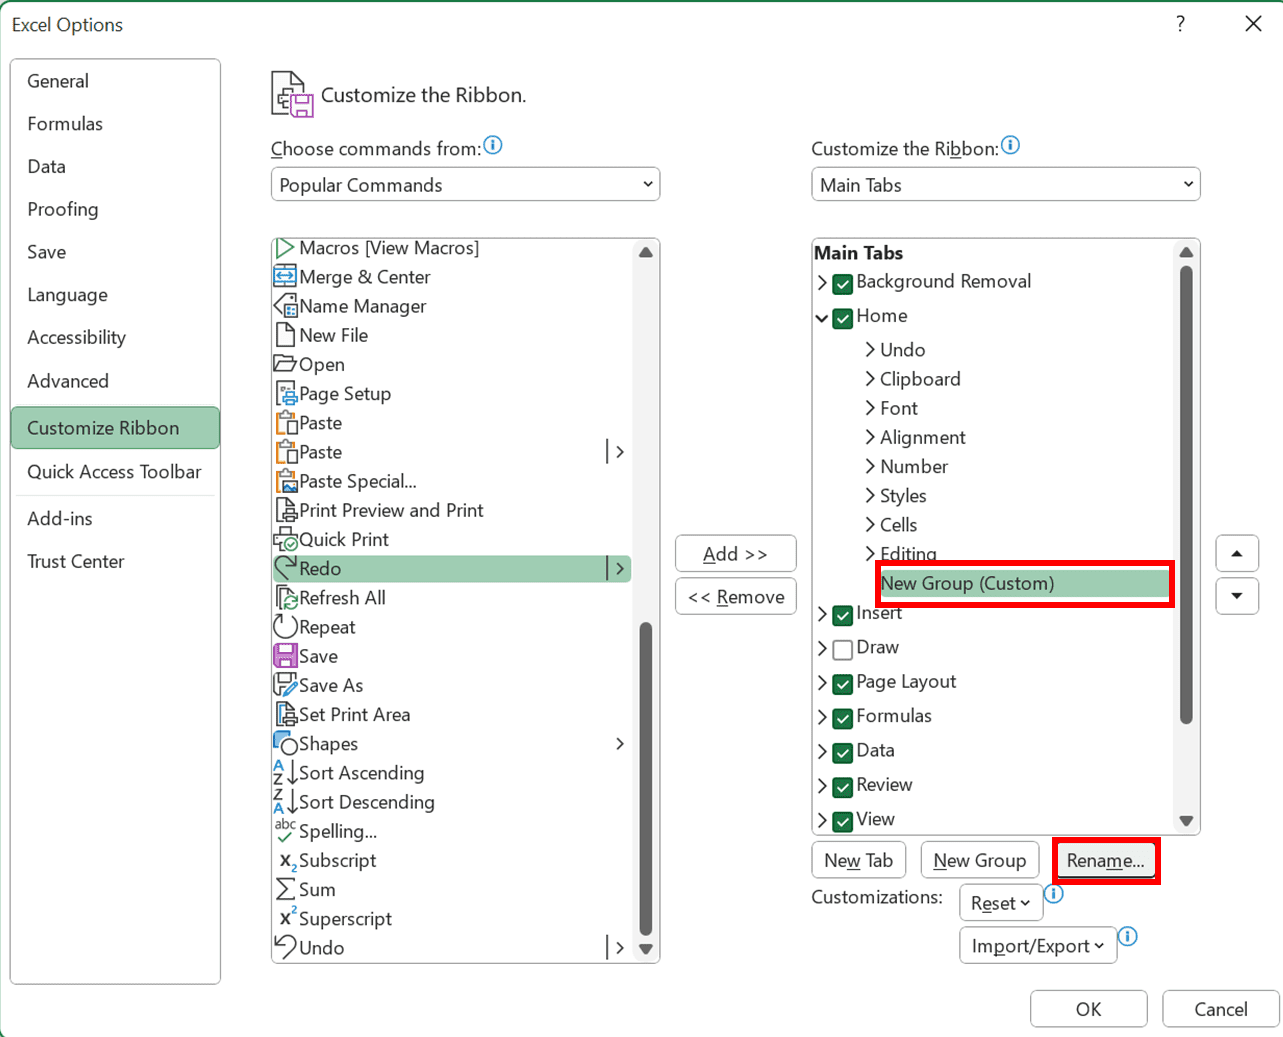 Ctrl + Y in Excel: Functions and How to Use It - Screenshot of the New Group in the Ribbon's Right Box and Rename... Button Locations